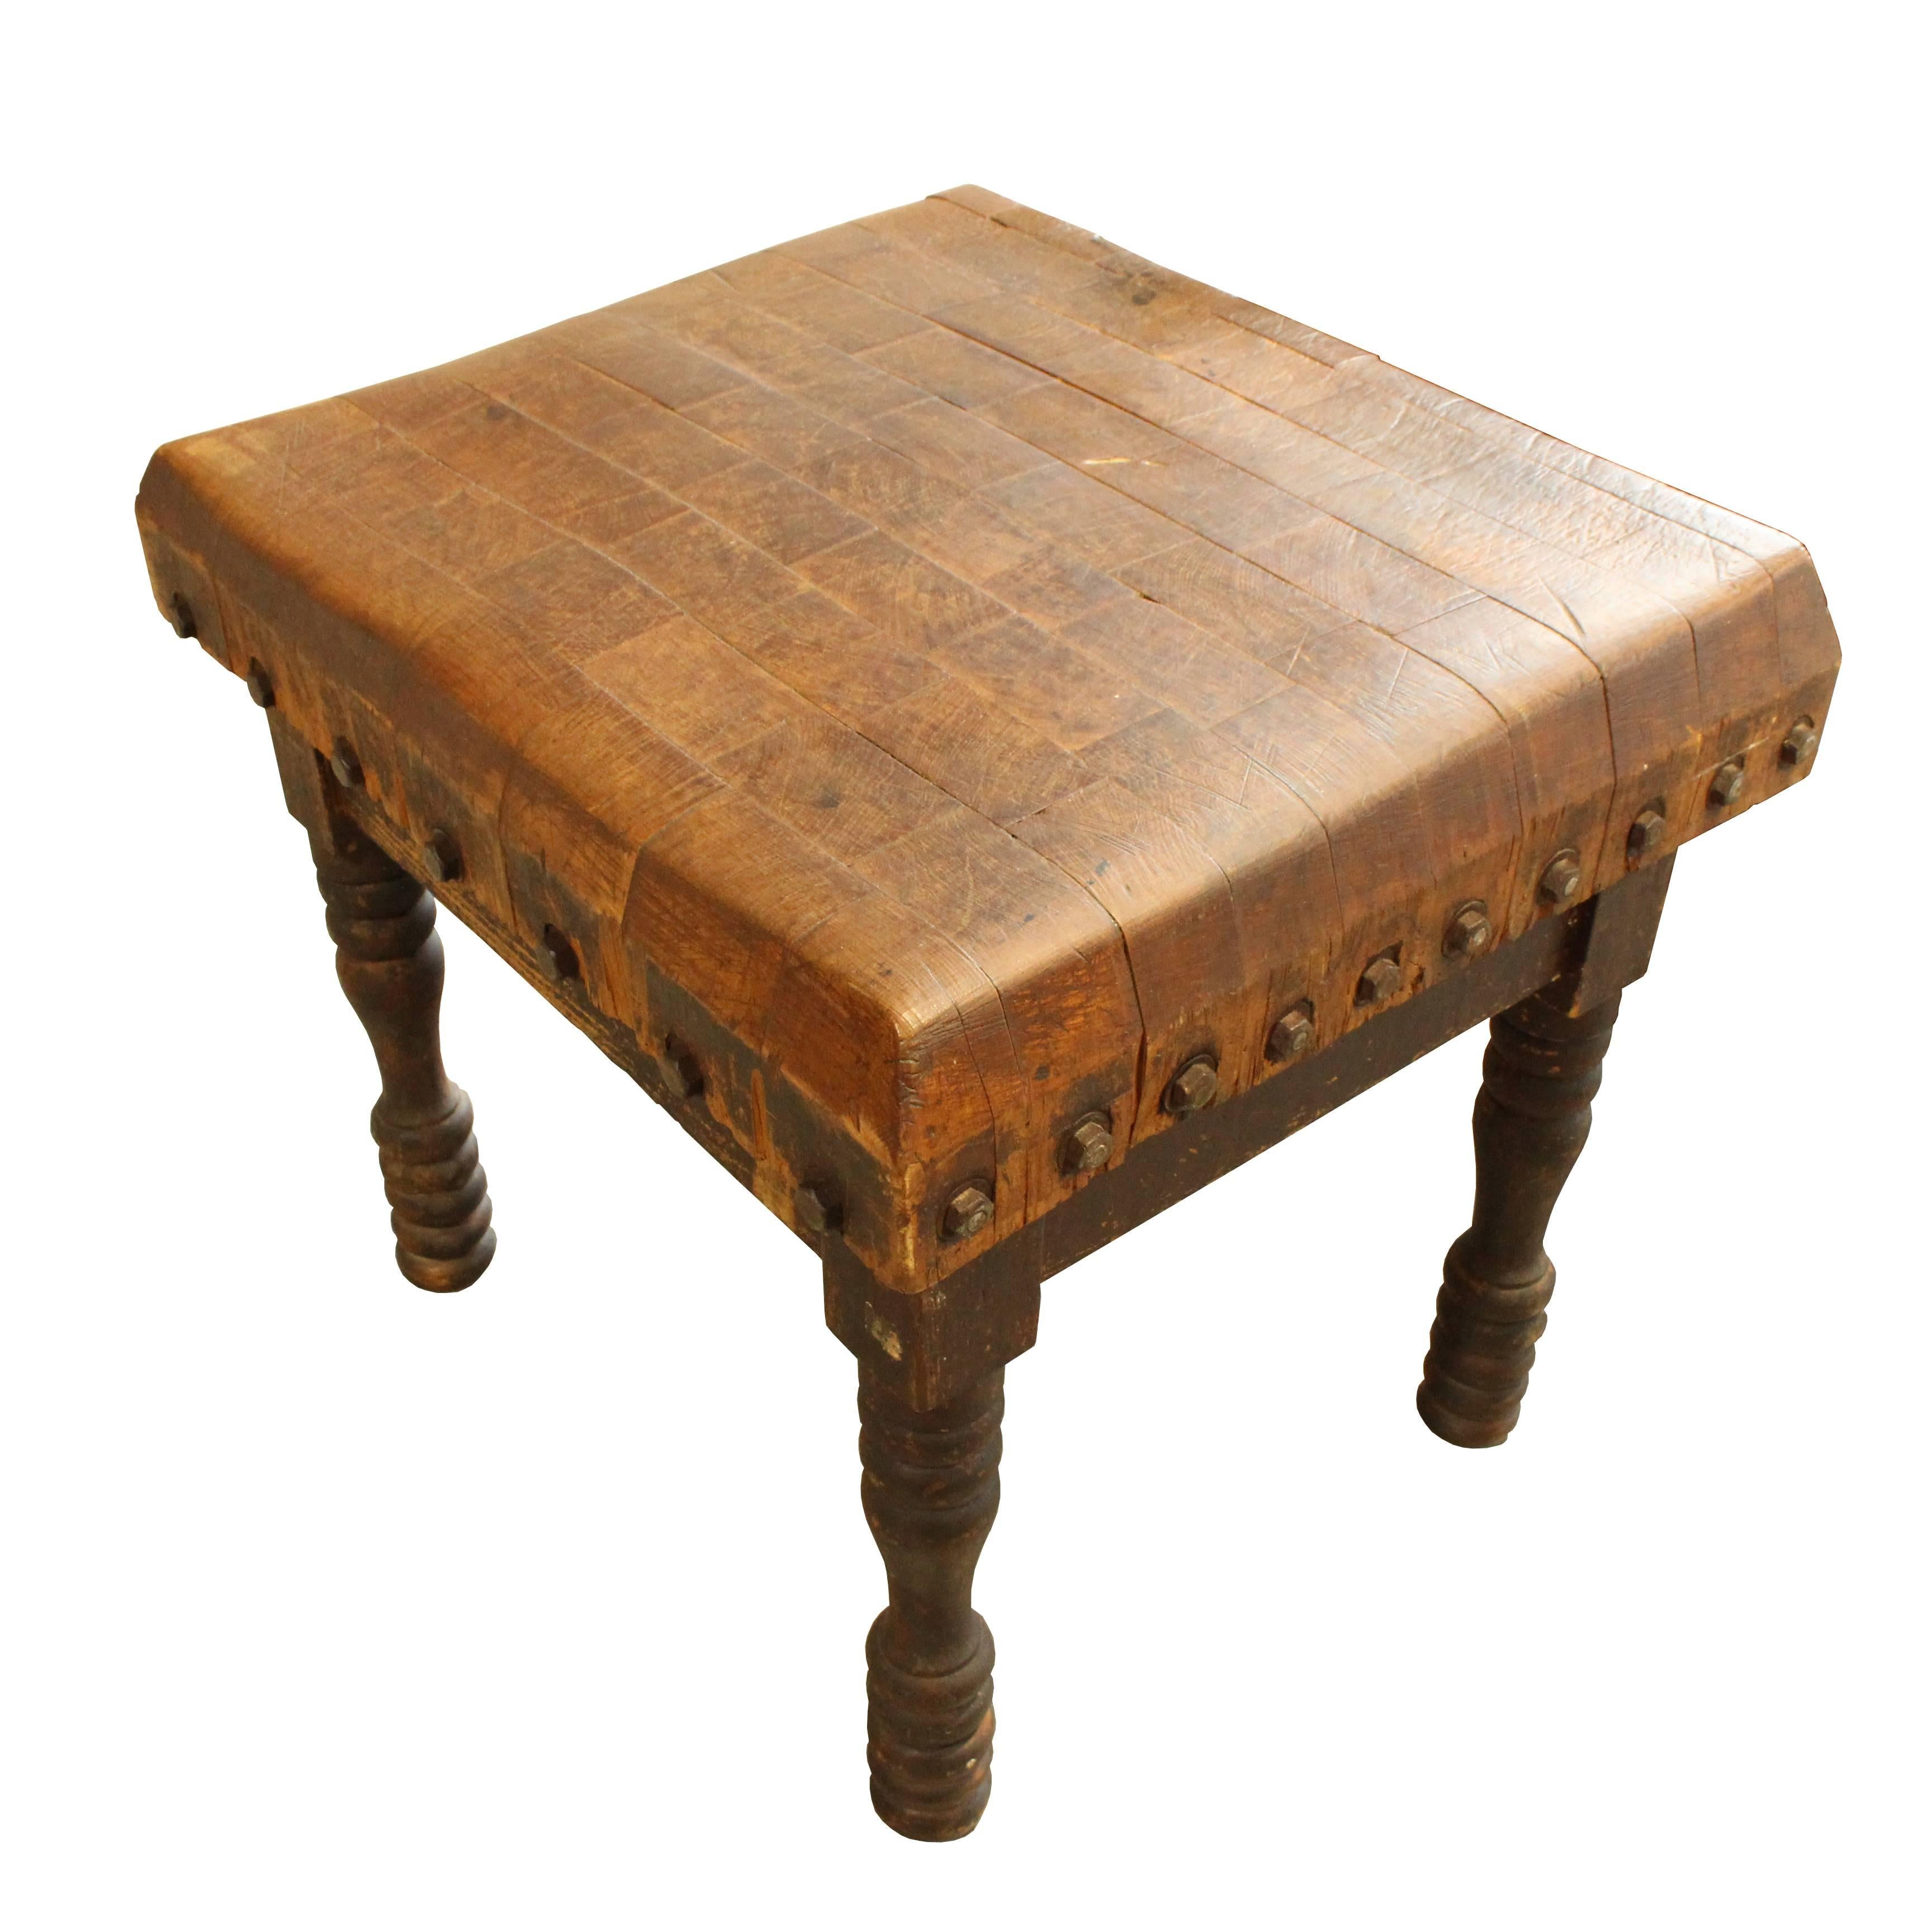 This early 20th century butcher block table features a beautifully worn top, which is accented by its exposed steel through bolts. This block also has very unusual spool type turning on its legs, giving striking visual appeal.